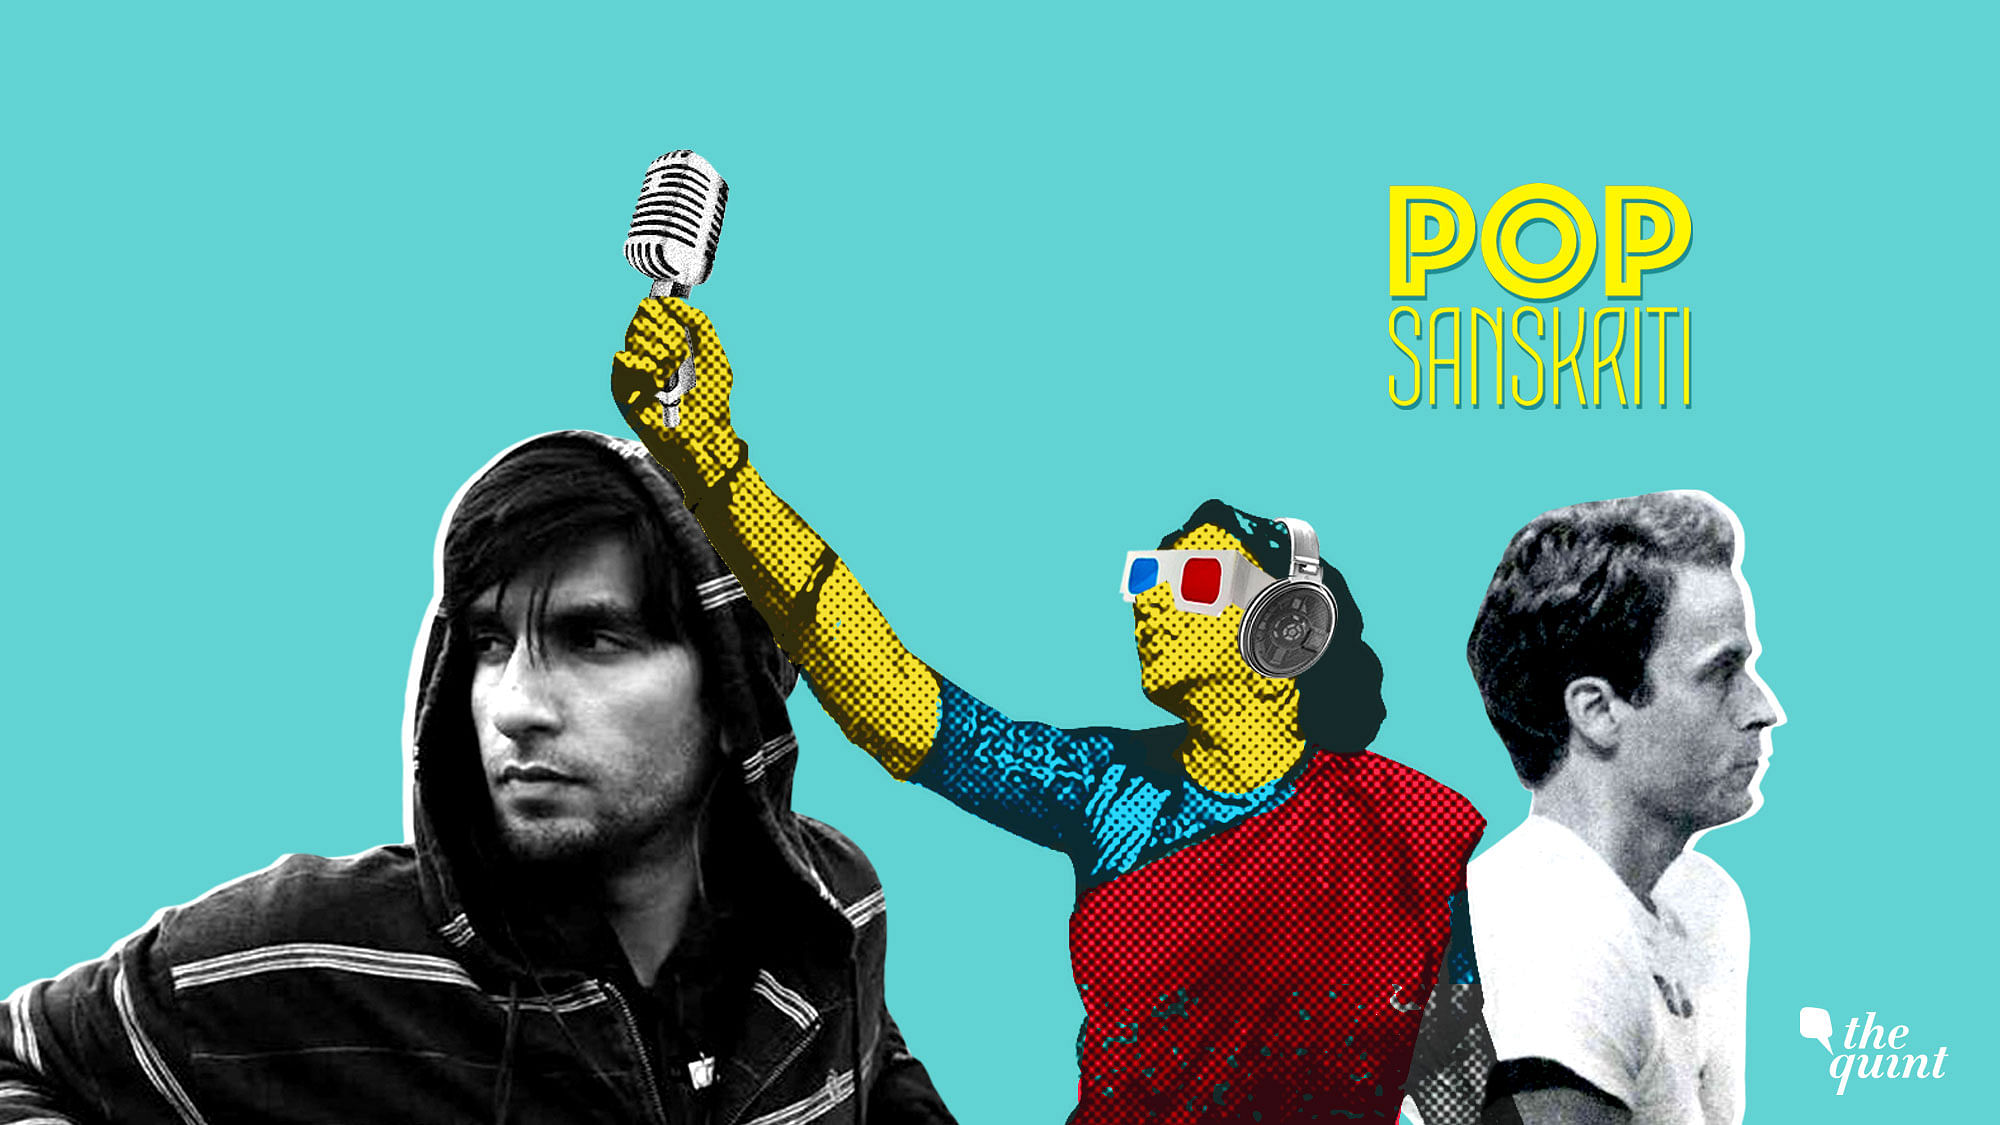 On the first episode of The Quint’s pop culture podcast ‘Pop Sanskriti’, we looked at Amazon Prime’s ‘Four More Shots Please’, the music of Zoya Akhtar’s Gully Boy, Netflix documentary ‘Conversation with a Killer: The Ted Bundy Tapes’ and video game ‘Road Rash’.